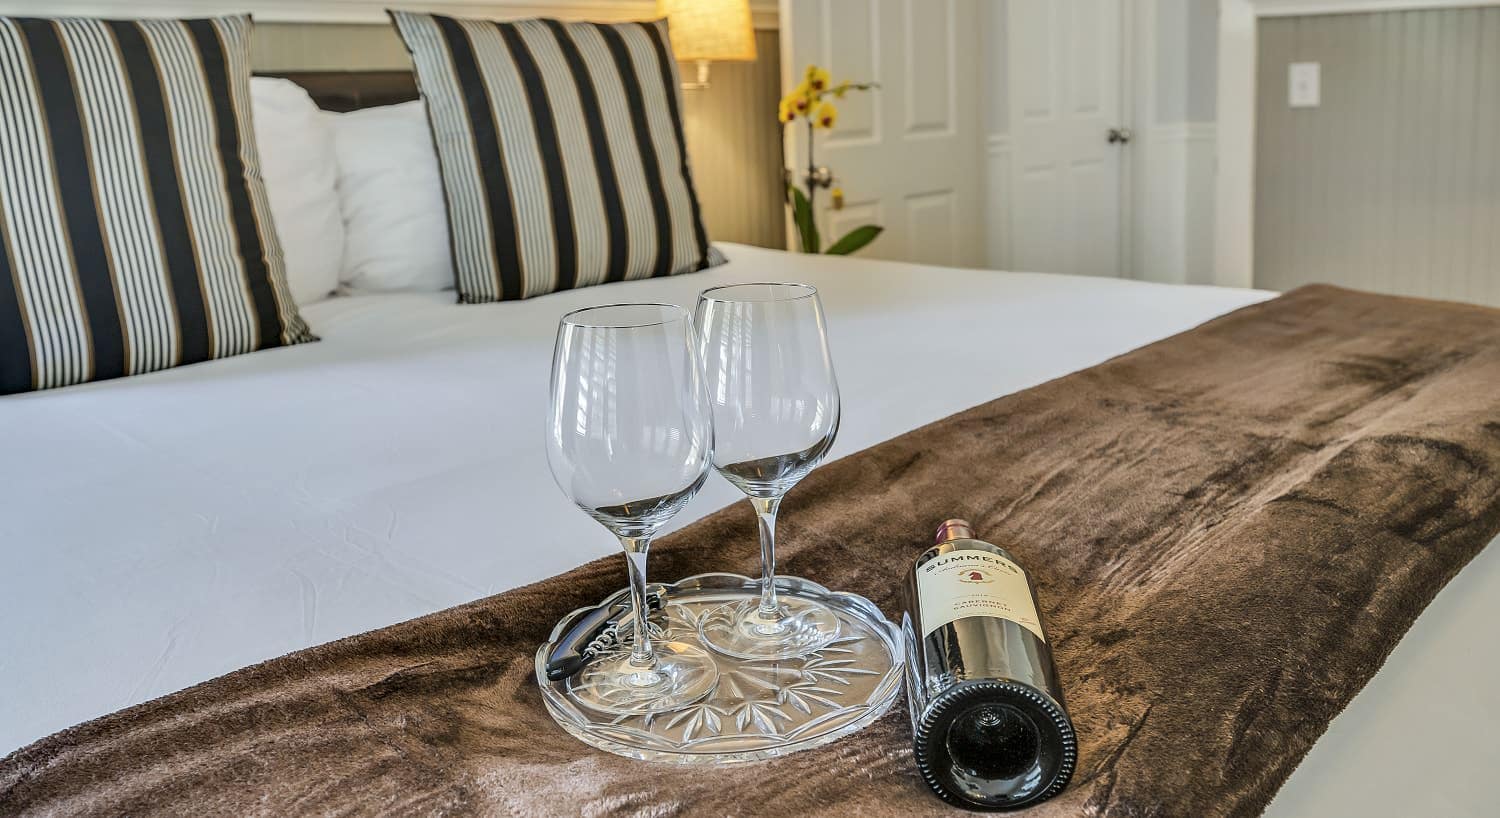 Close up view of two wine glasses on glass tray and bottle of wine on brown blanket on bed with white sheets